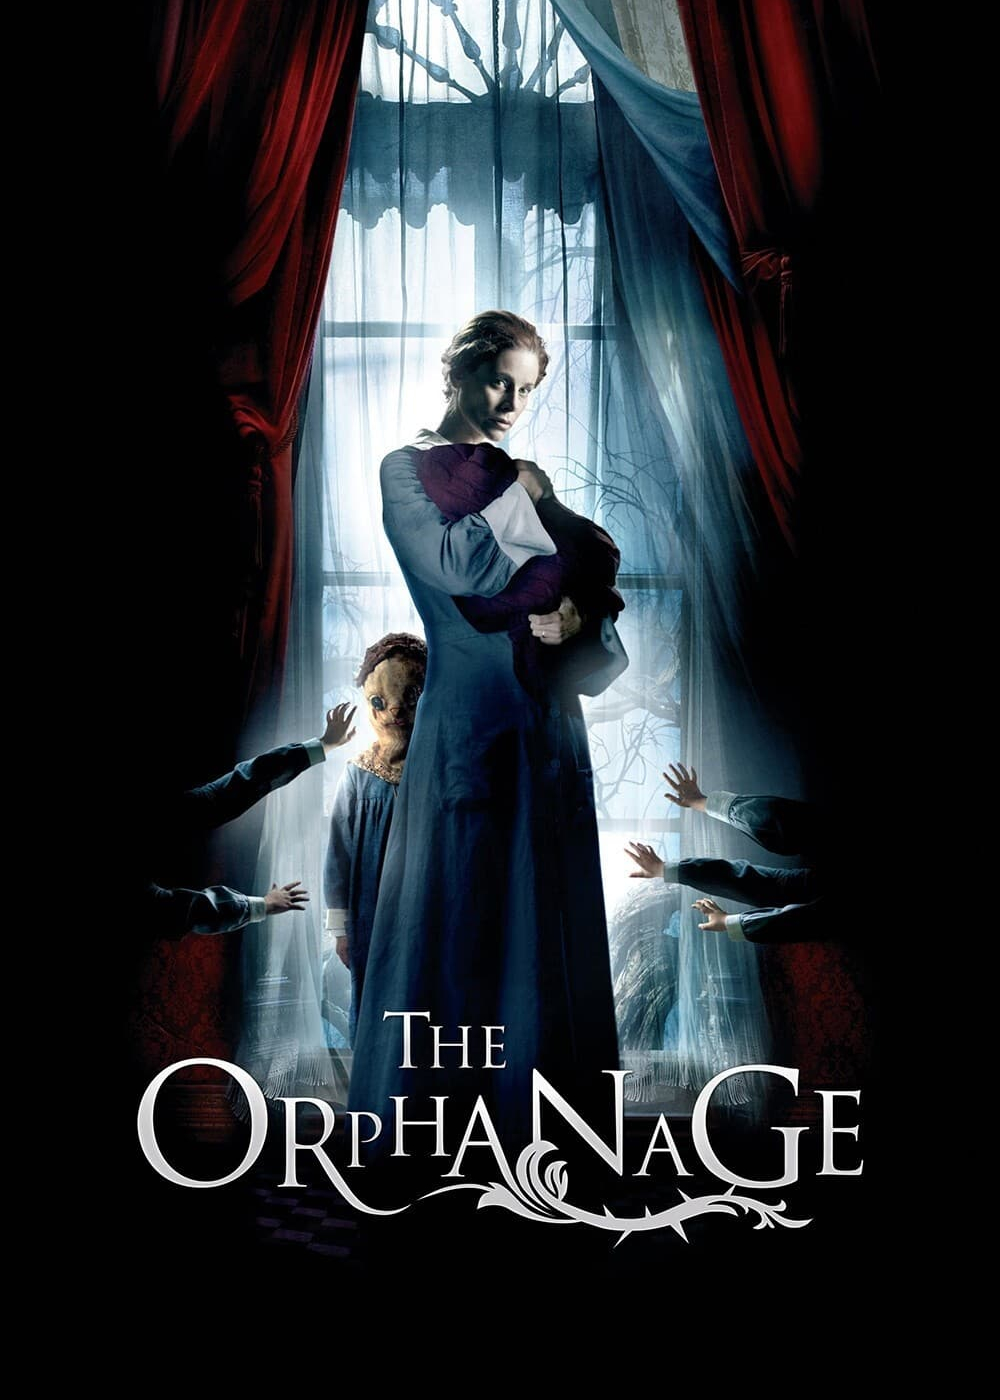 Poster Phim The Orphanage (The Orphanage)